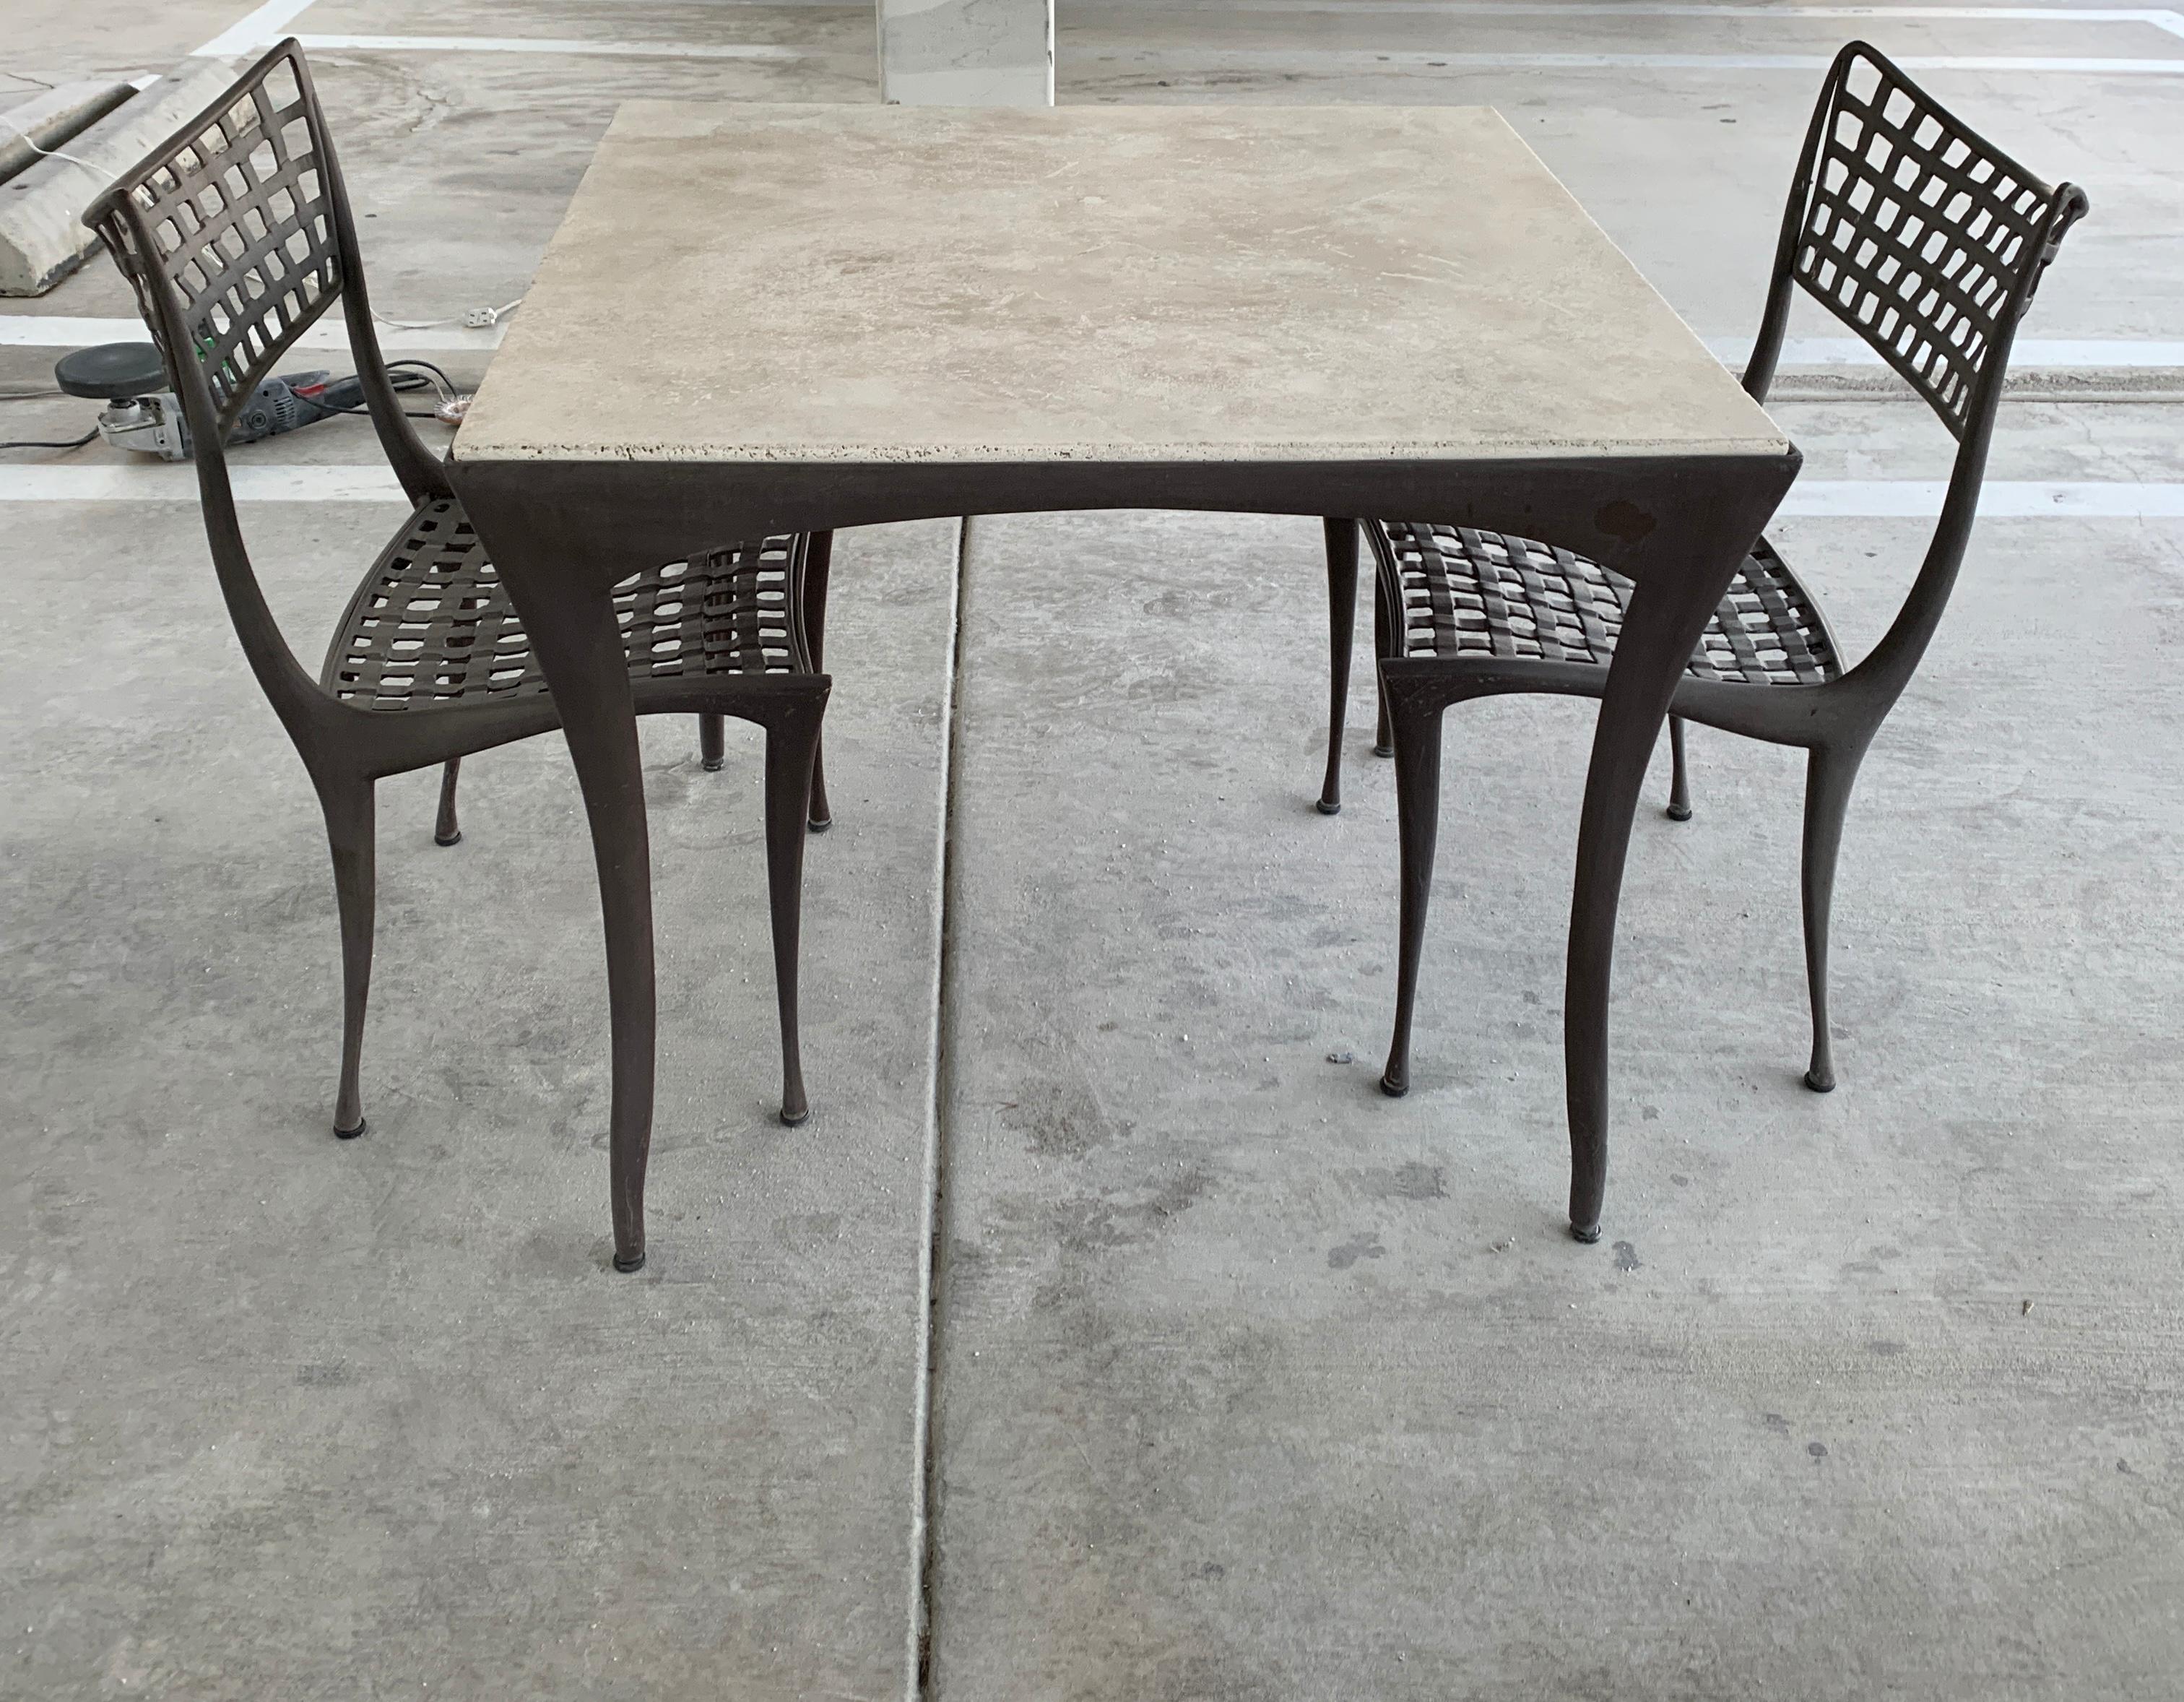 A Dan Johnson designed set for Brown Jordan. The original glass has been replaced with a beautiful piece of travertine. The chairs measure approximately 20 inches wide, 21 inches deep, 23 inches tall and 17.5 inches seat height. The table is 35.5